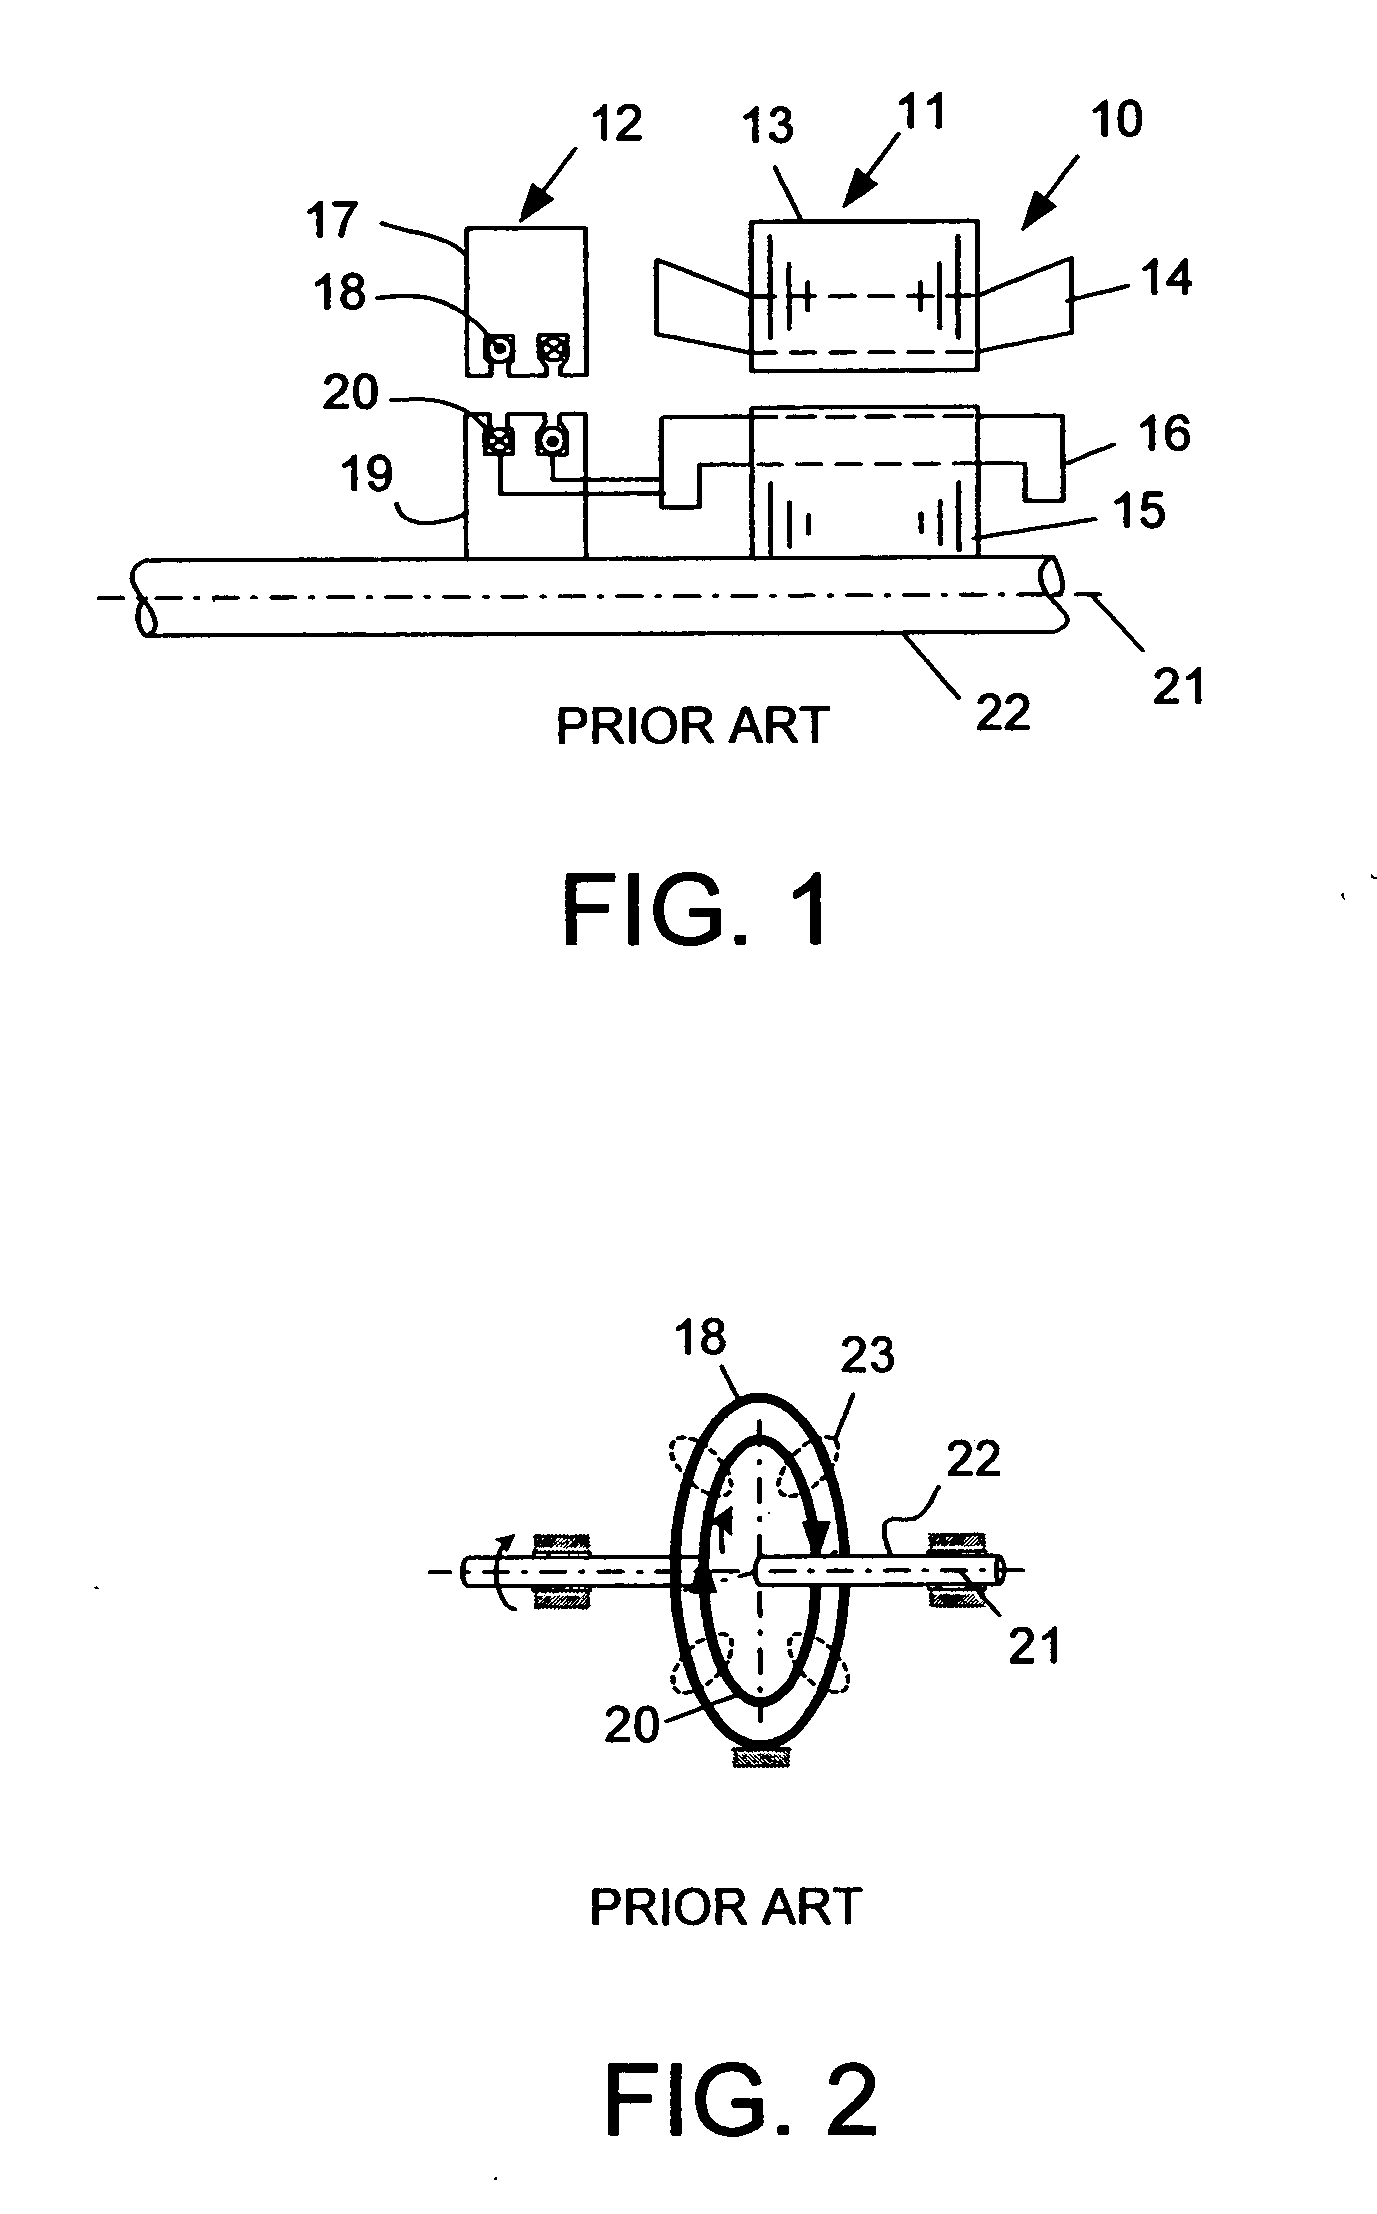 Hybrid-secondary uncluttered permanent magnet machine and method